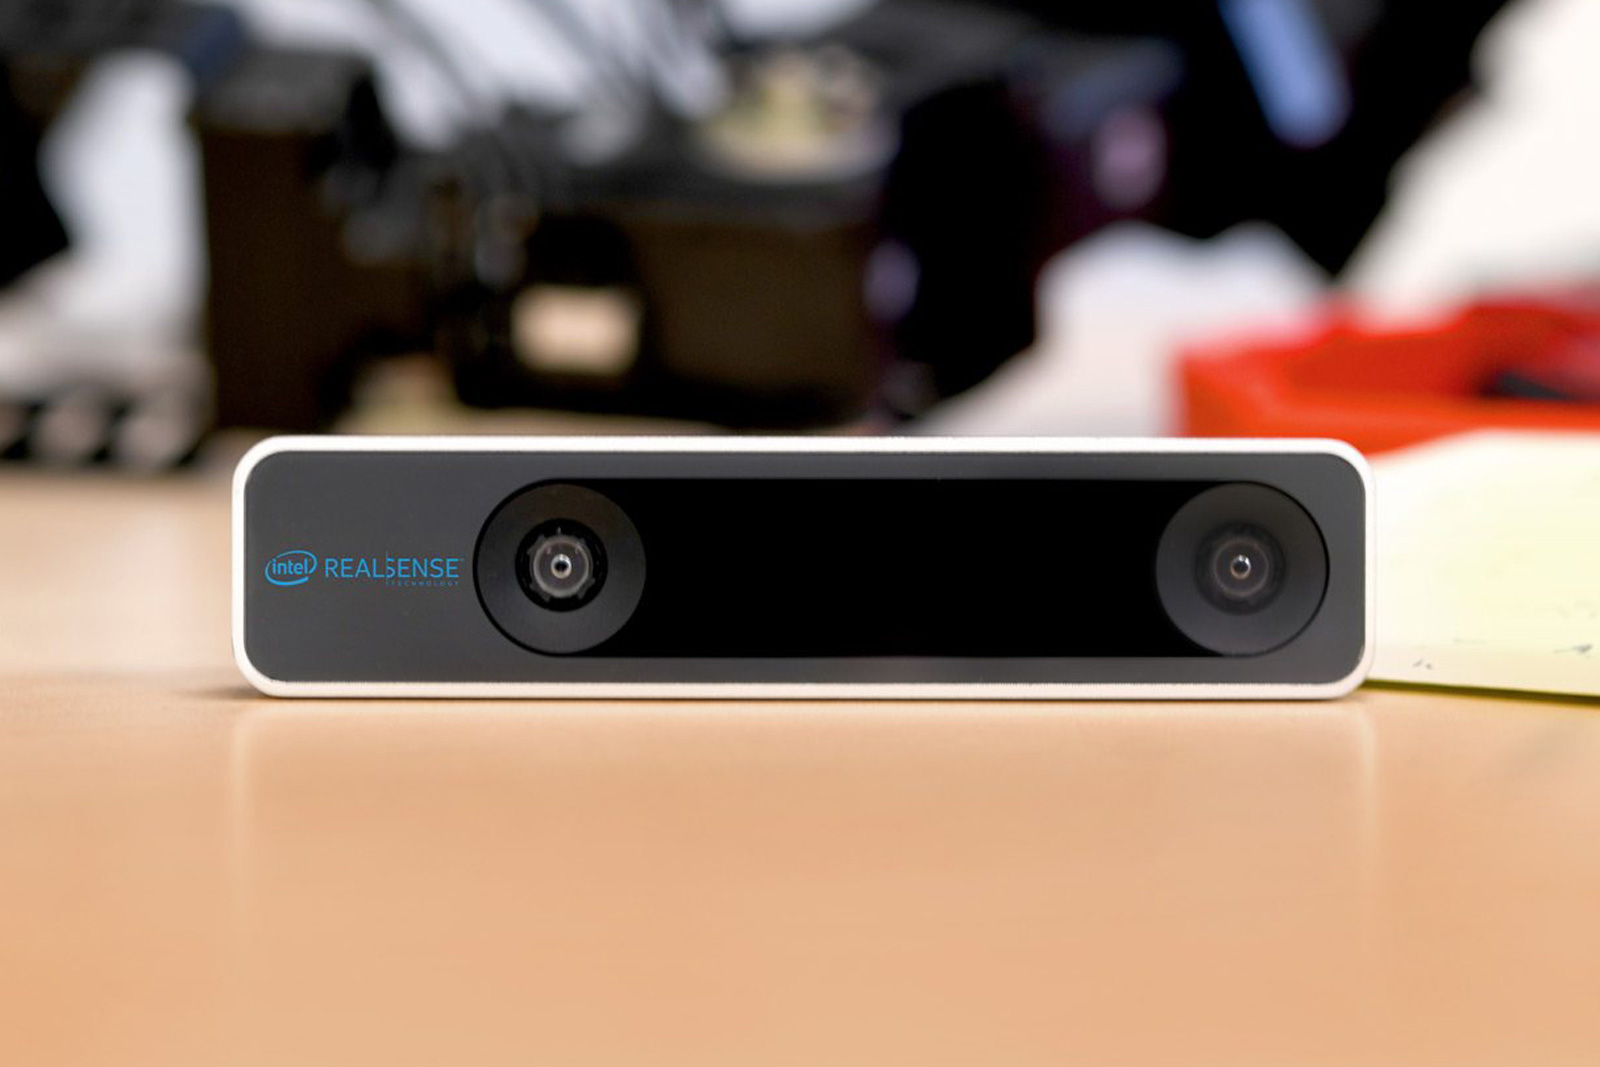 Intel is giving up on its AI-powered RealSense cameras